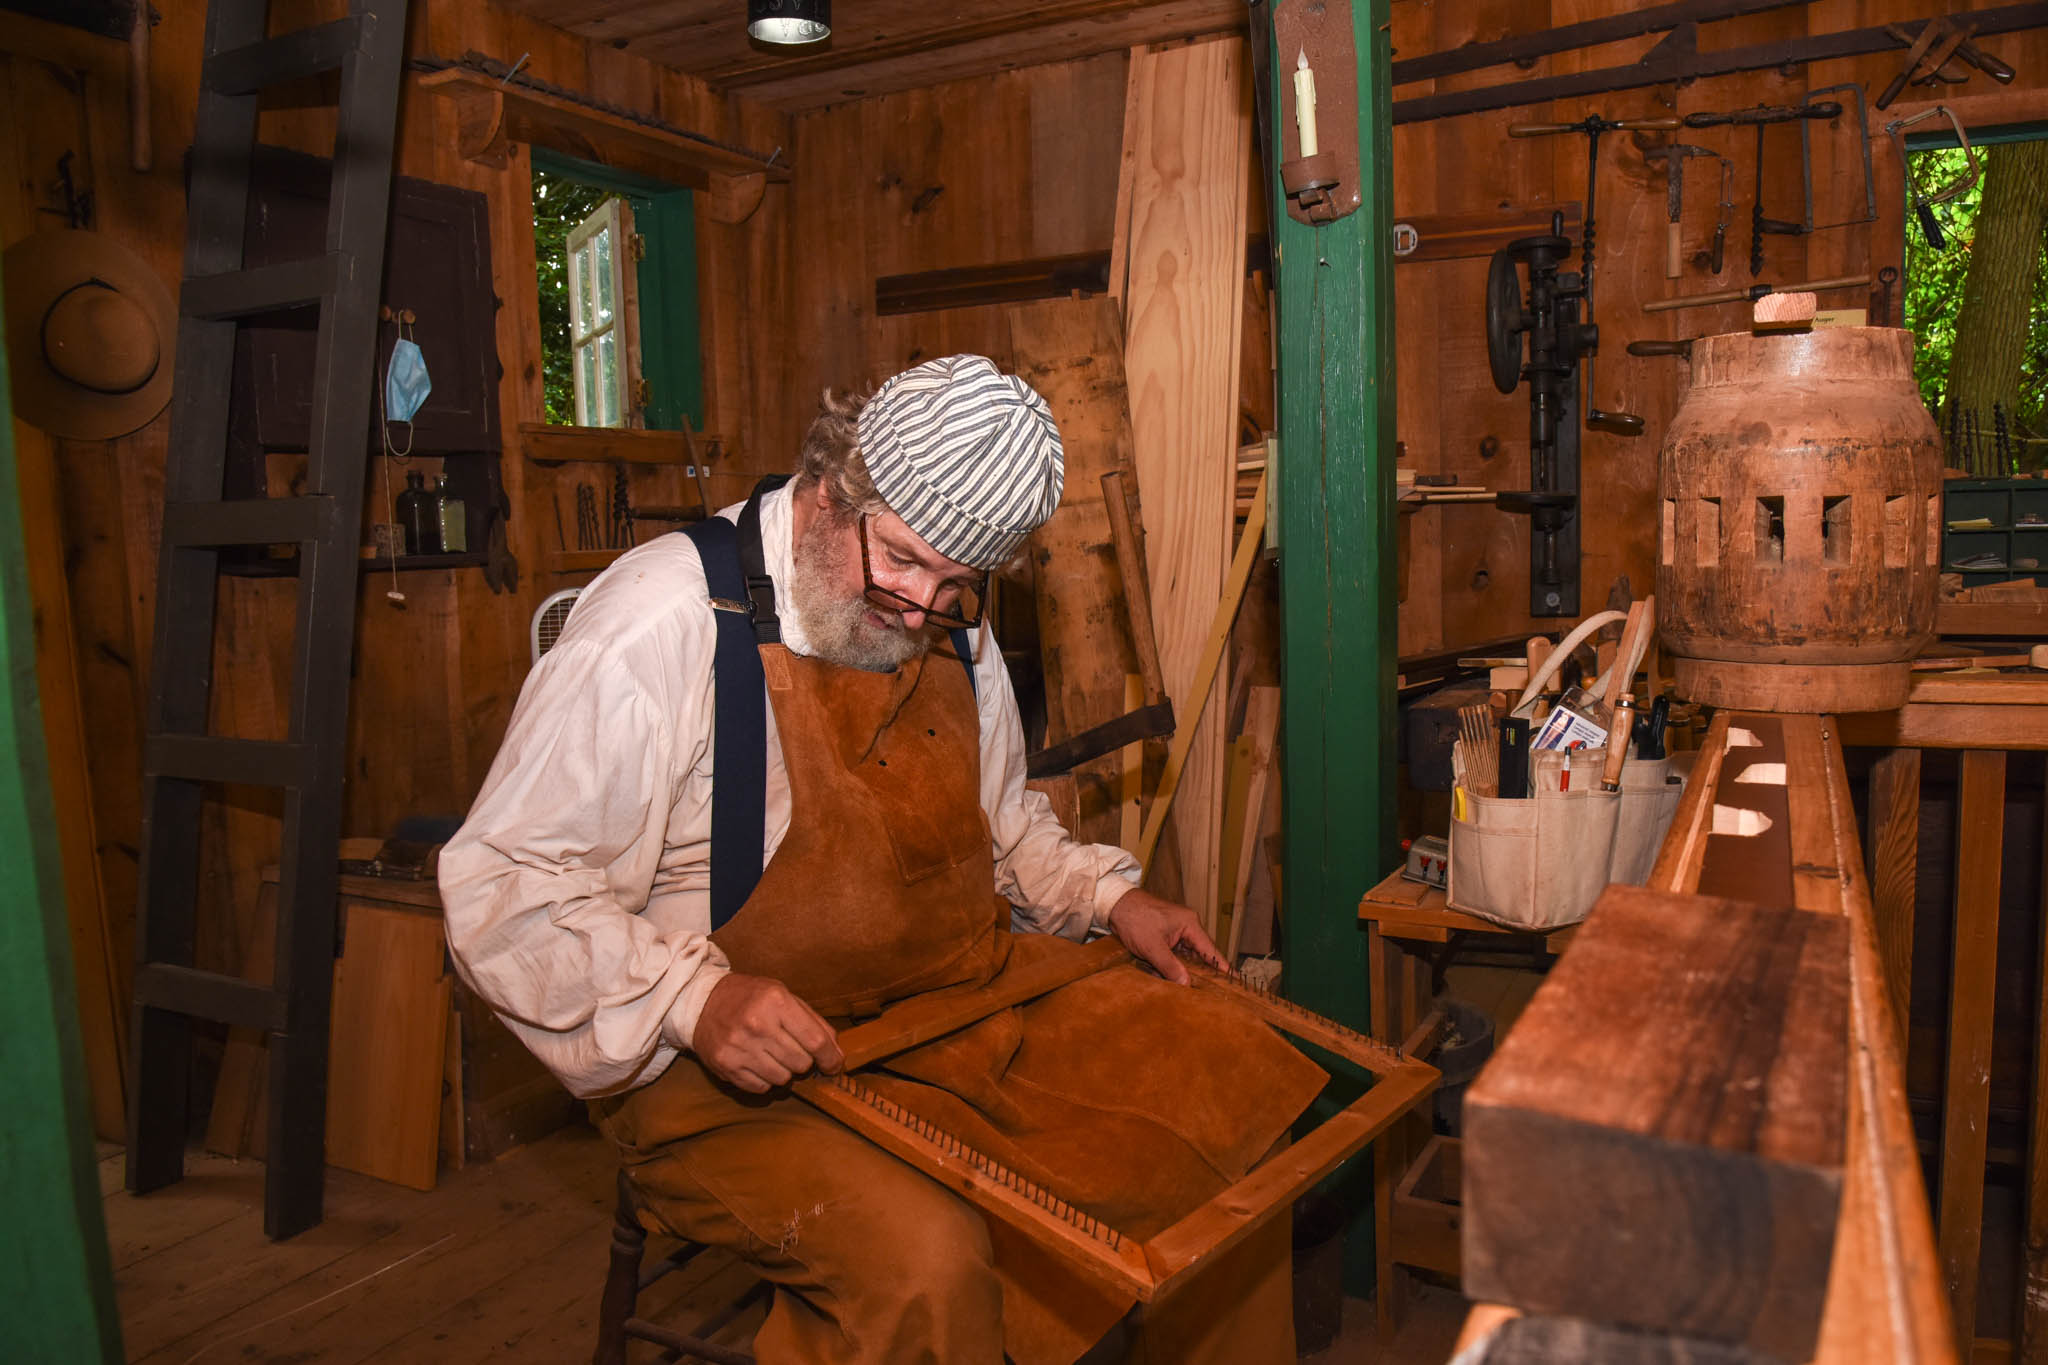 A woodworker demonstrates how things are made at the Woodworking shop. This was built in 1900 Historic Cold Spring Village